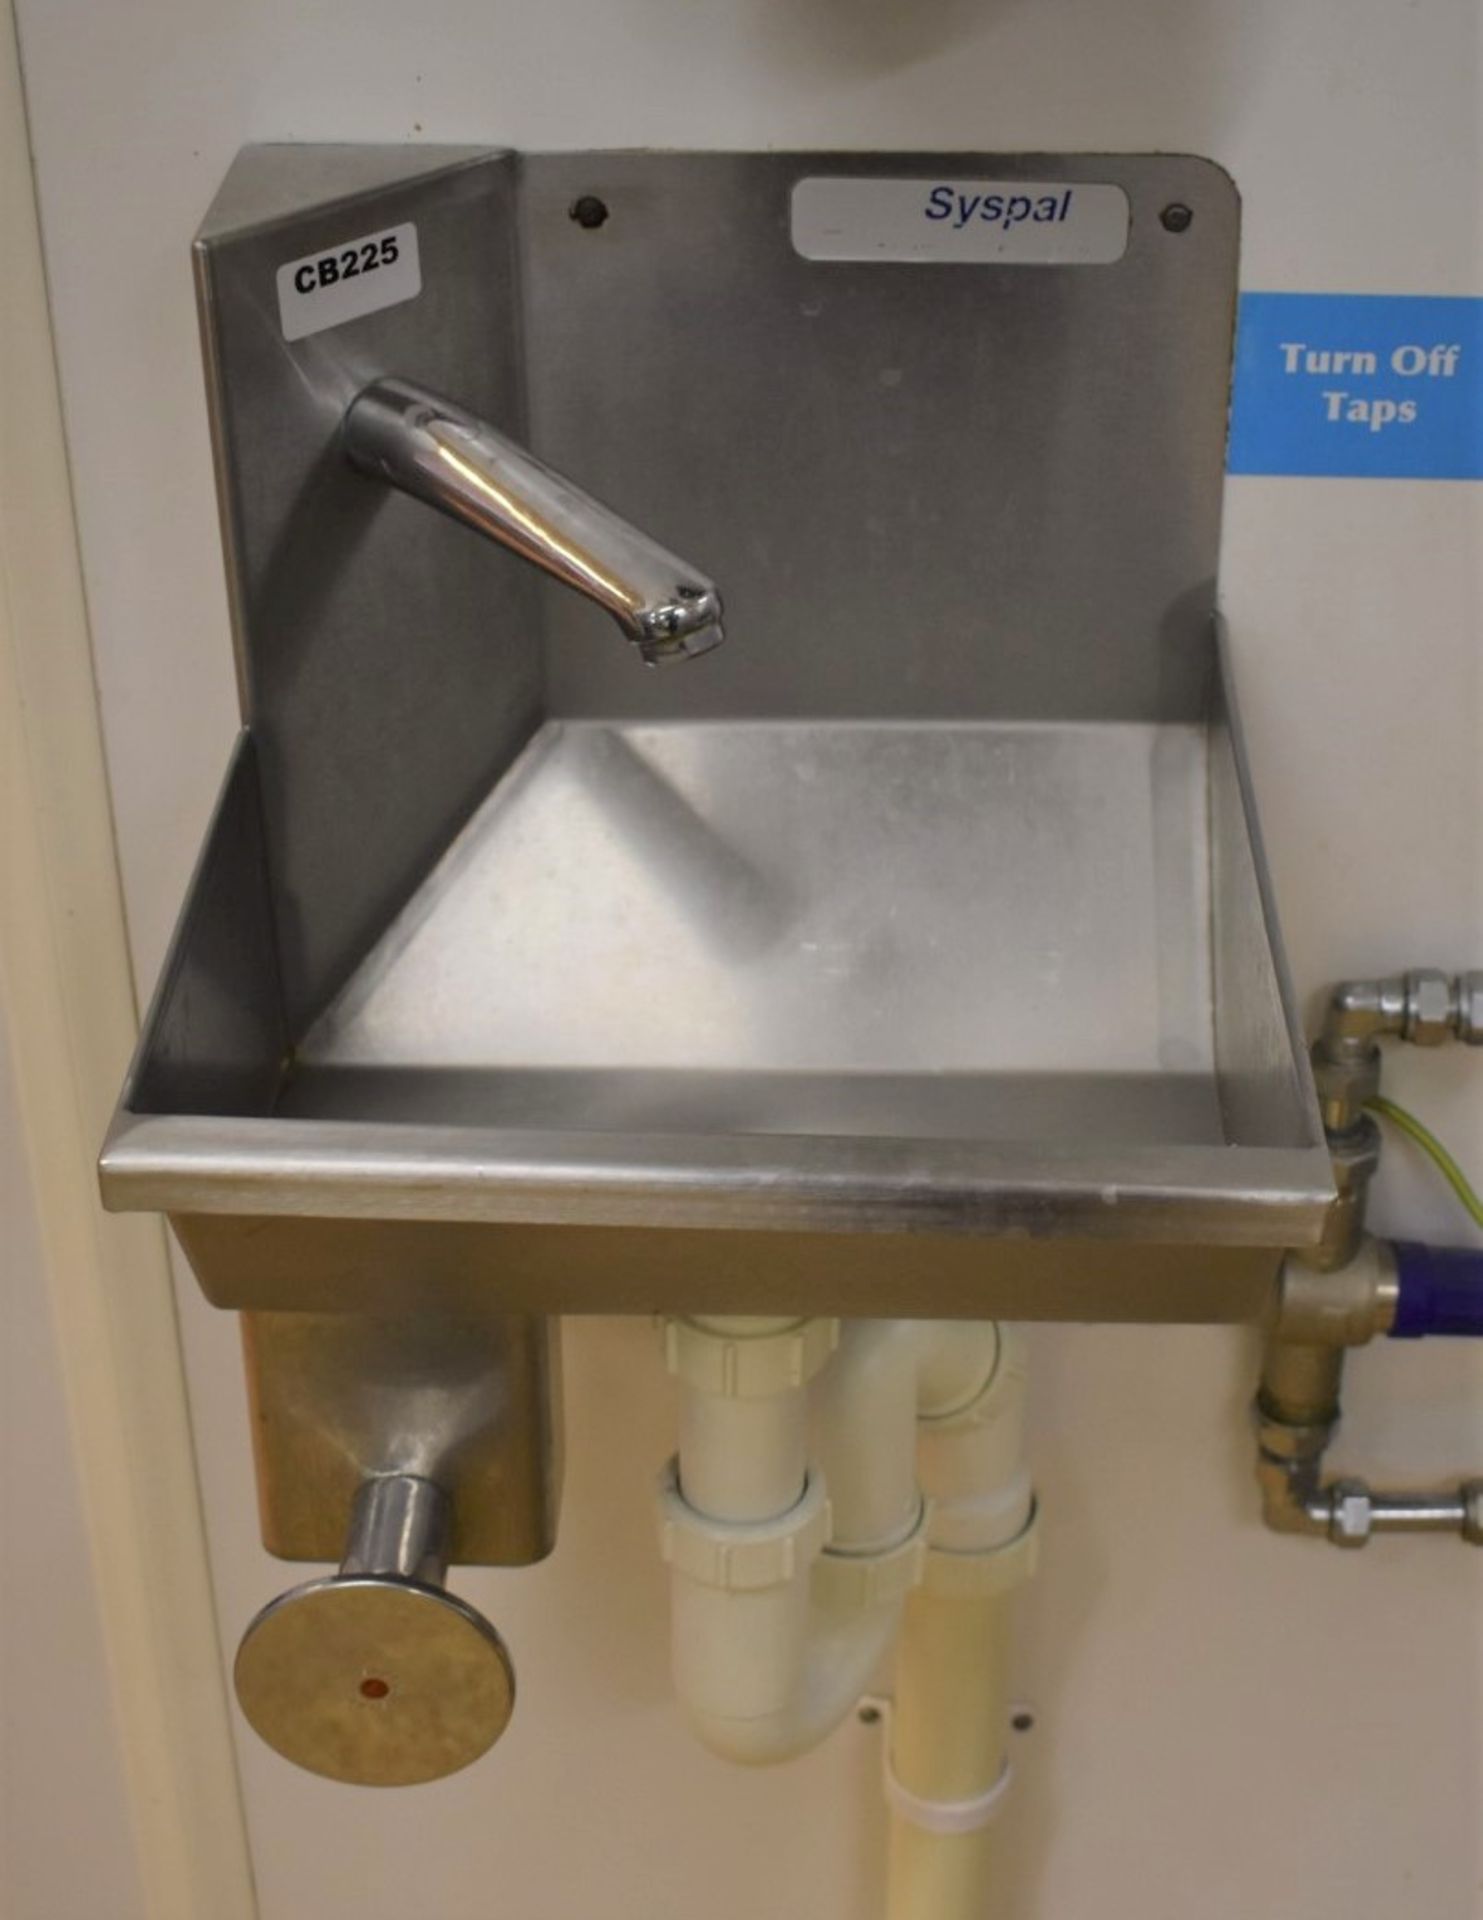 1 x Knee Operated Commercial Hand Wash Sink Basin by Syspal - Stainless Steel Construction With Knee